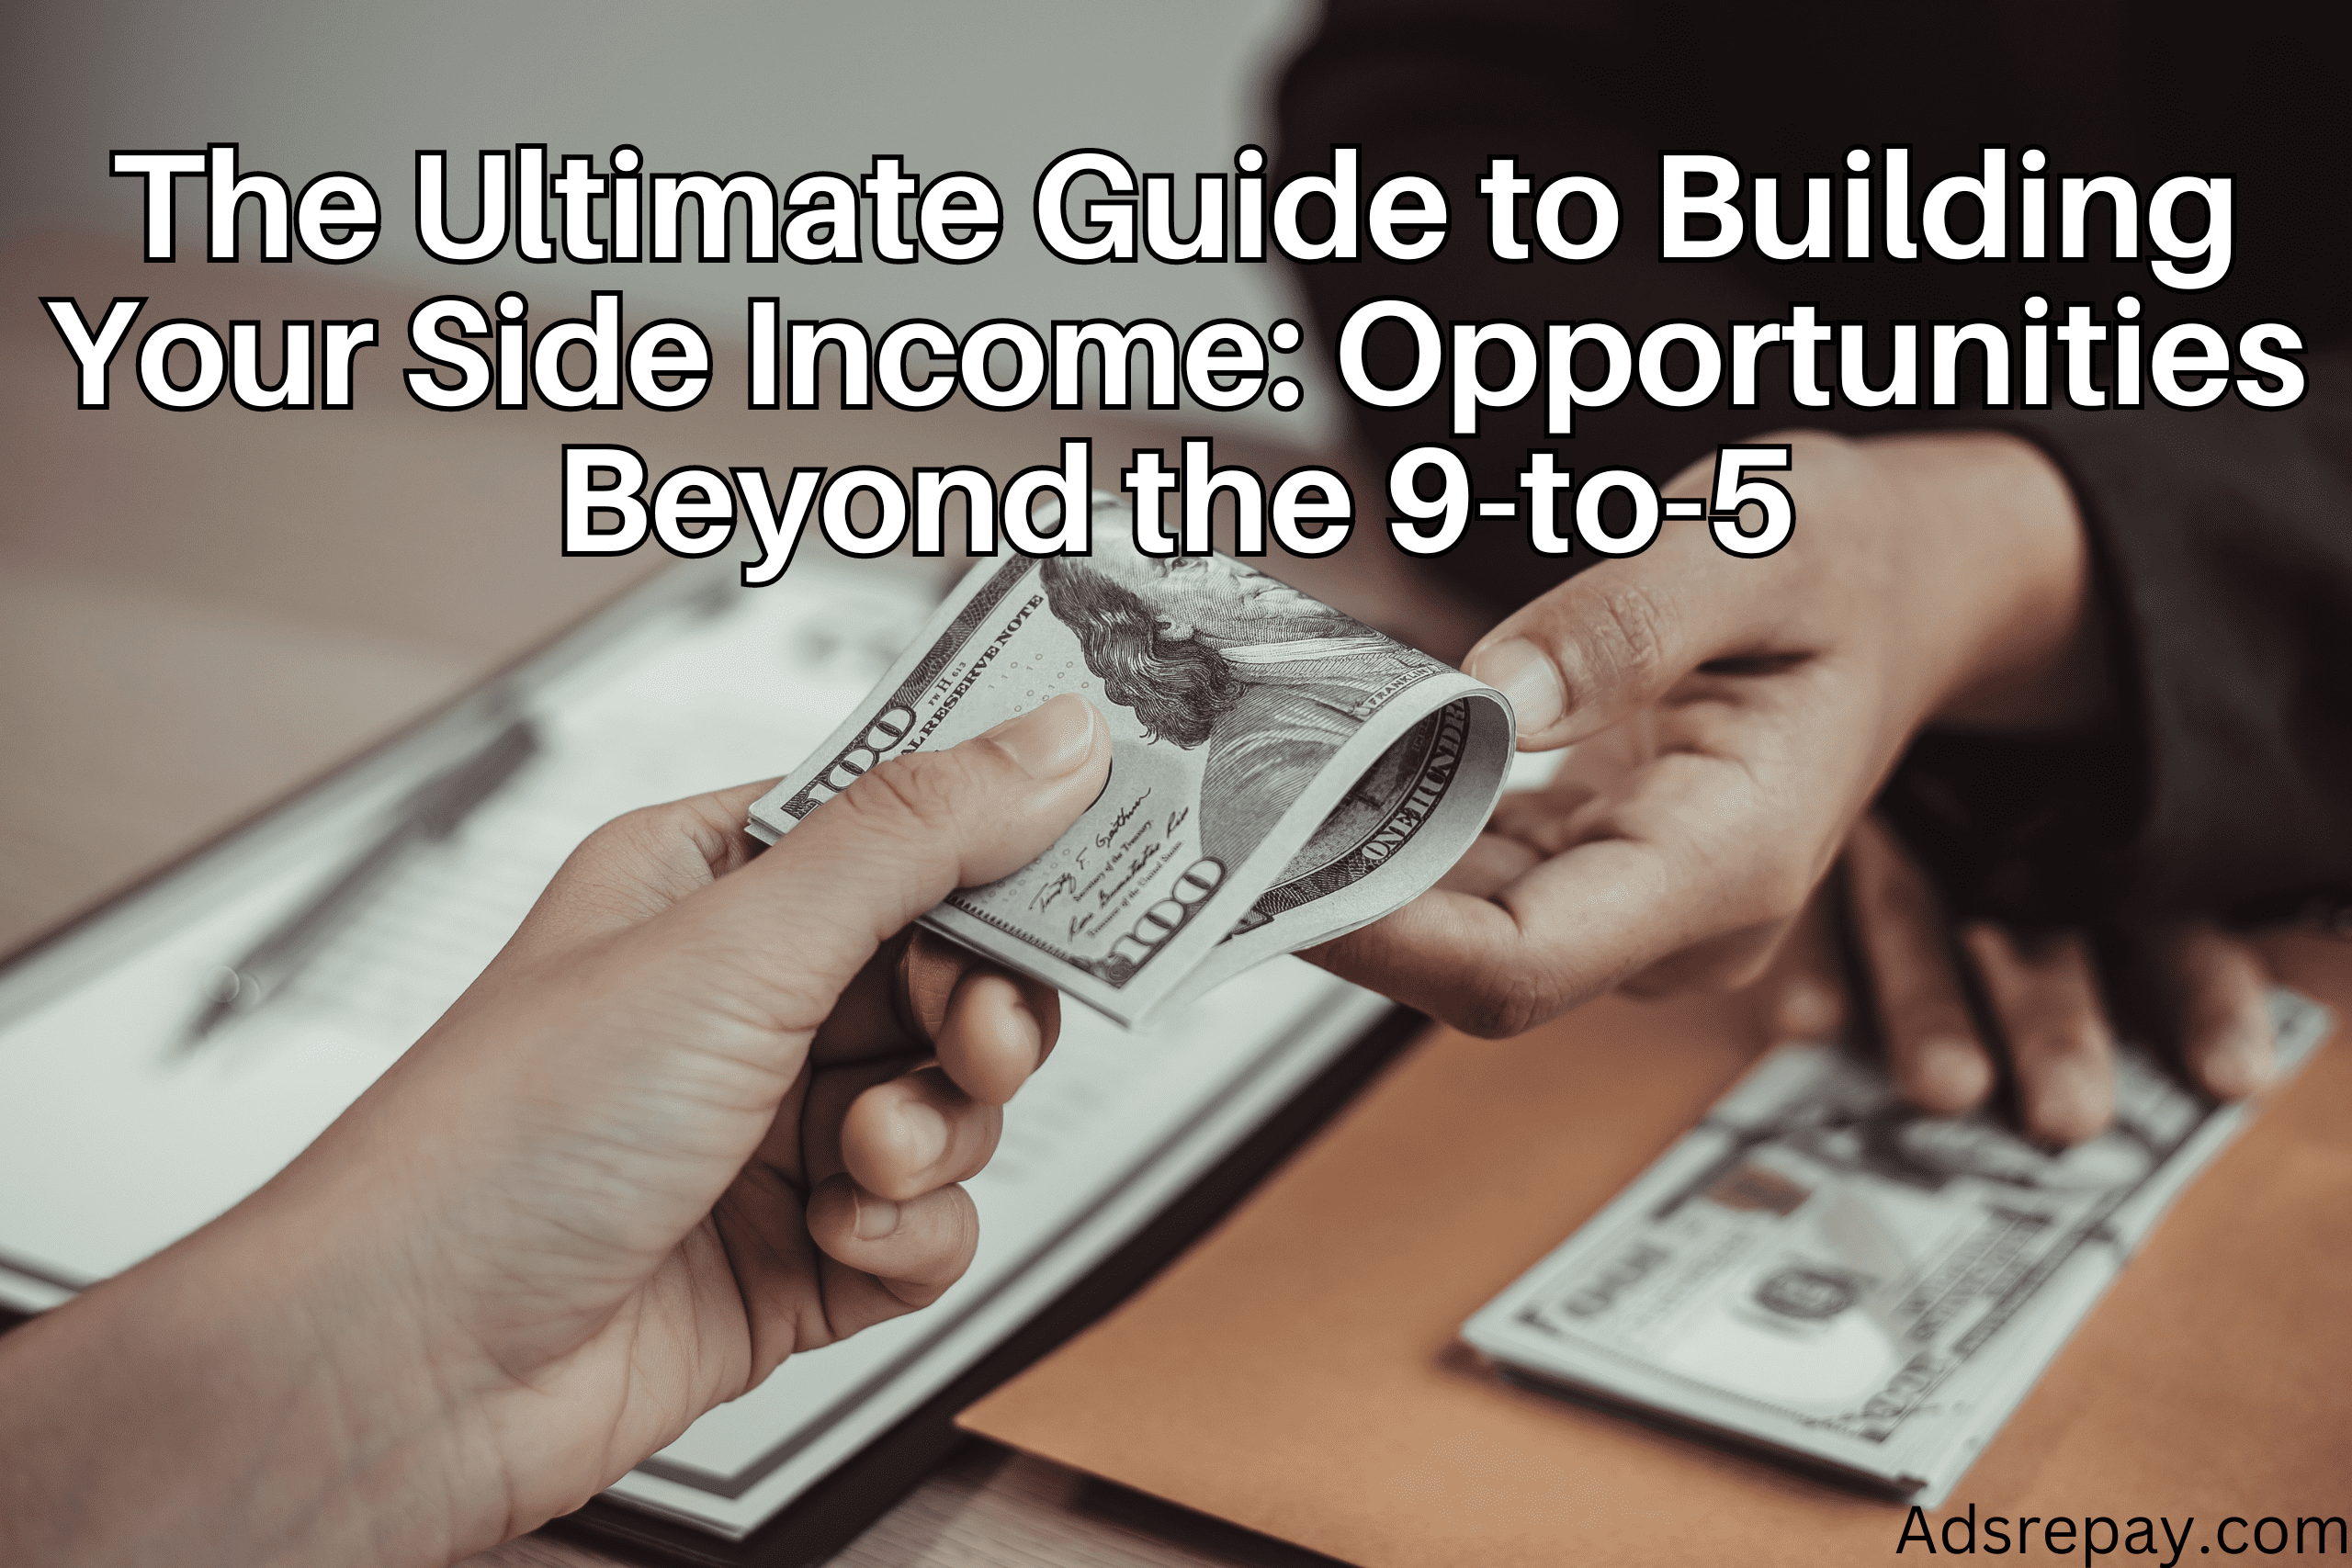 The Ultimate Guide to Building Your Side Income: Opportunities Beyond the 9-to-5